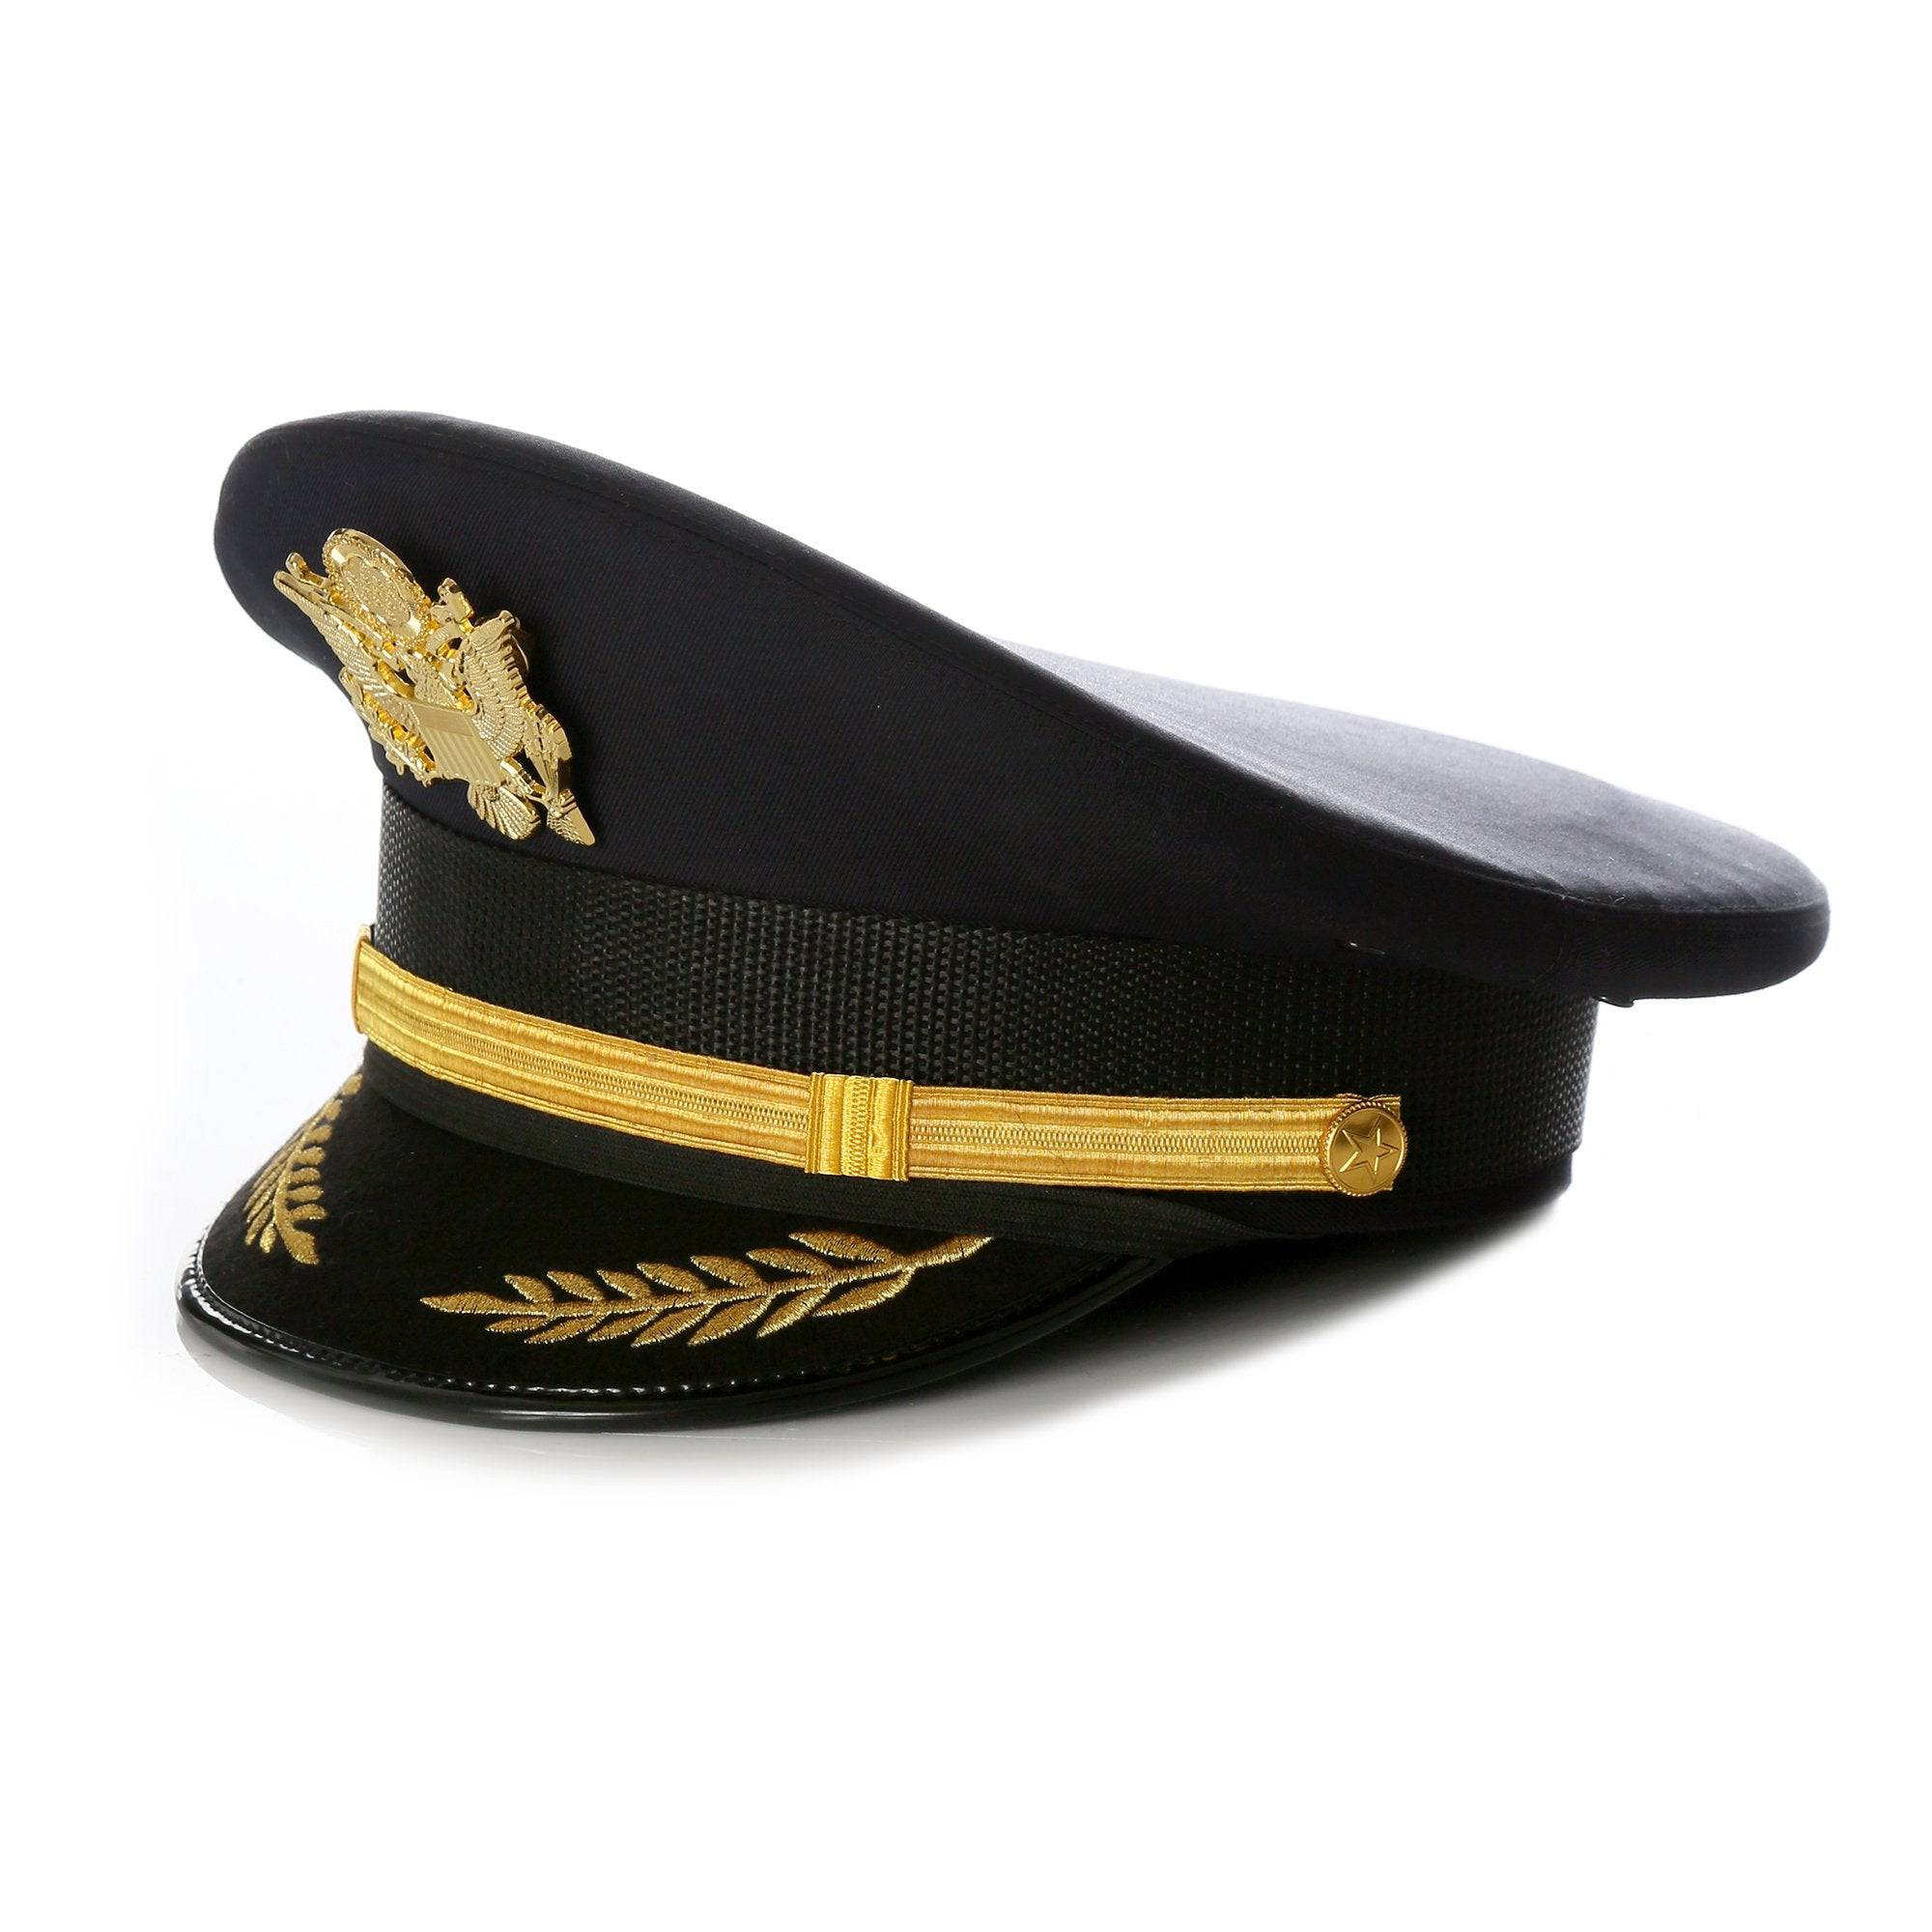 Nautical Boat Captain Hat, Black/White, One Size, Wearable Costume  Accessory for Halloween